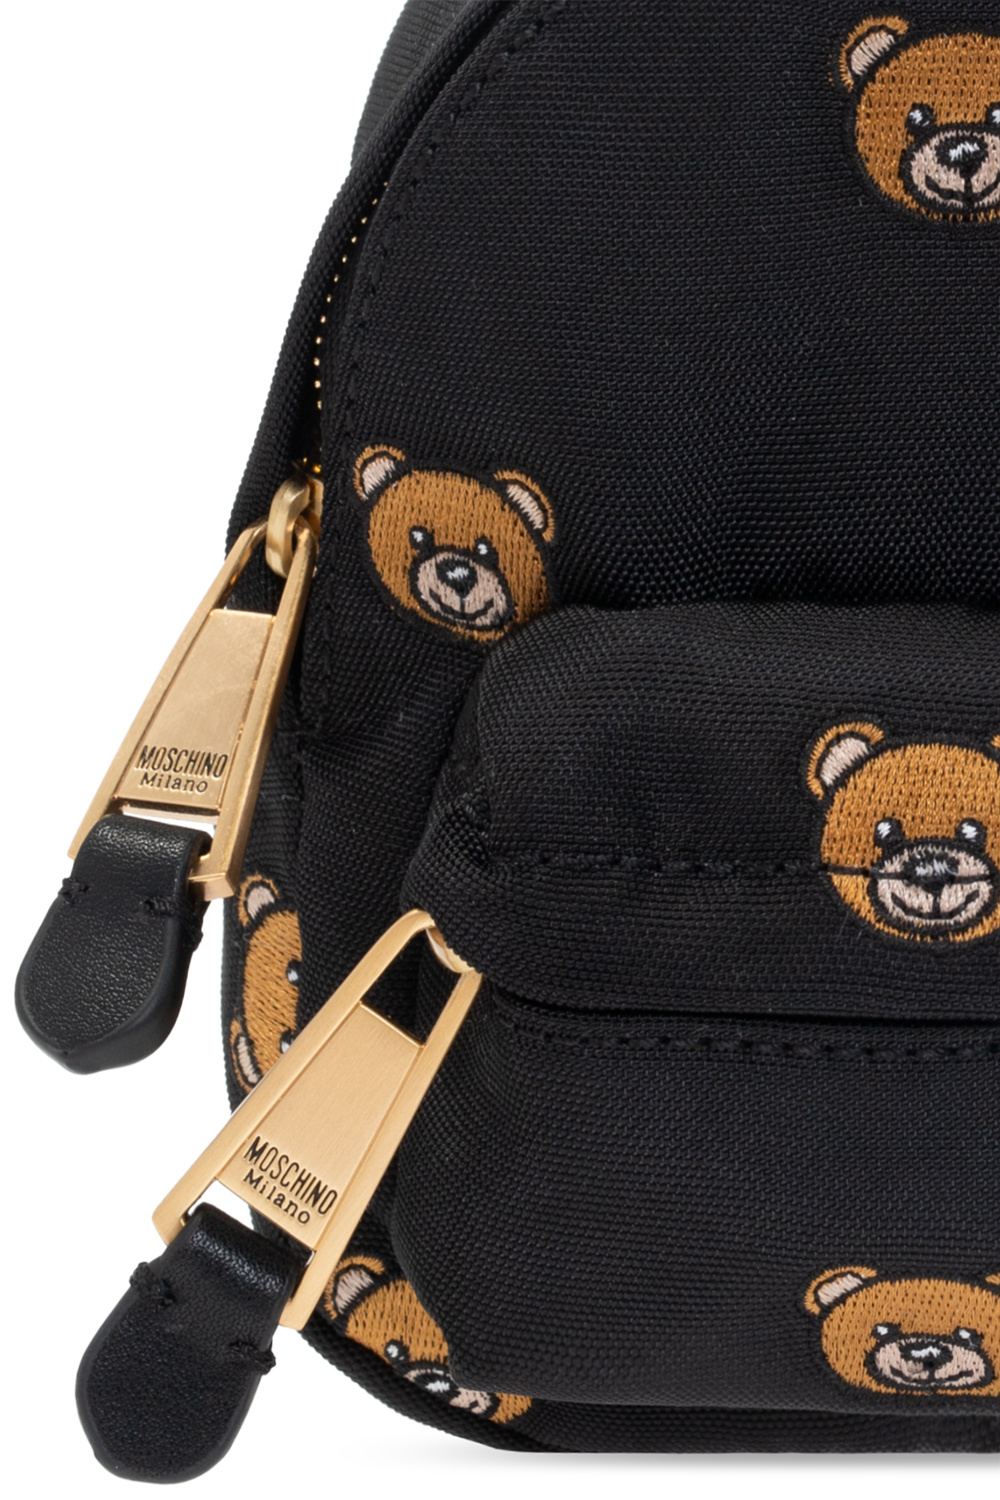 Micro backpack with Teddy bear Moschino - S3telShops Bonaire